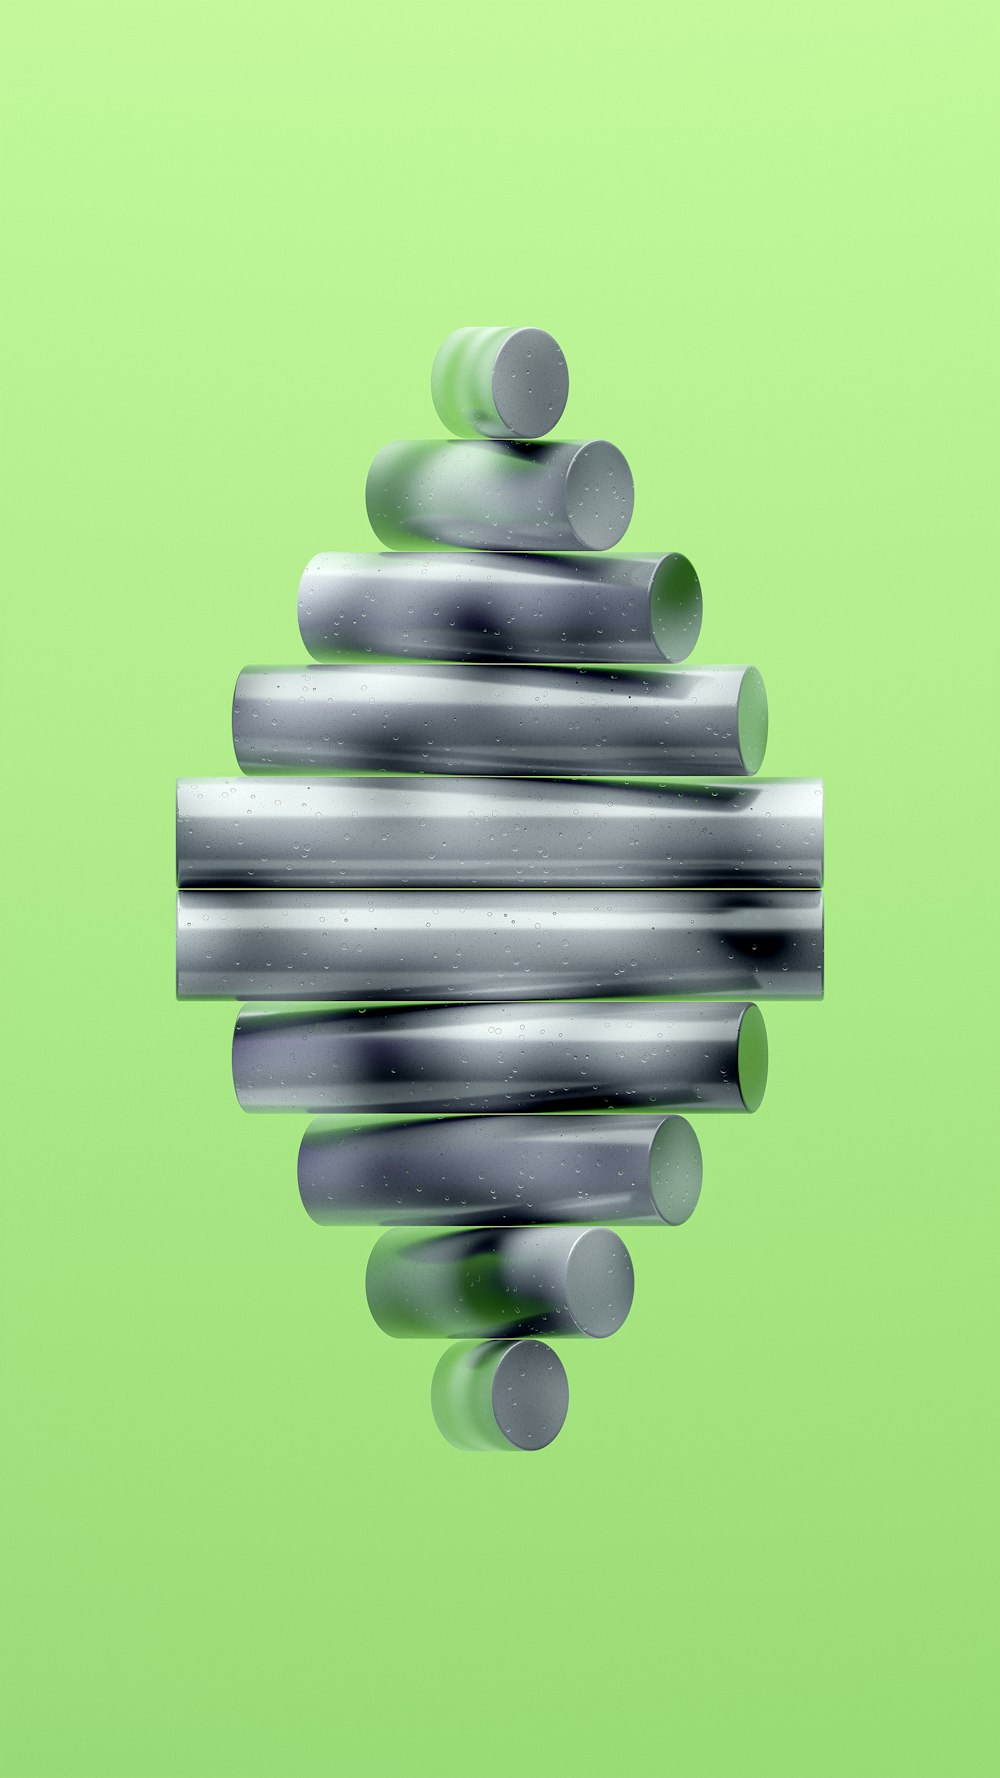 a group of metal objects on a green background